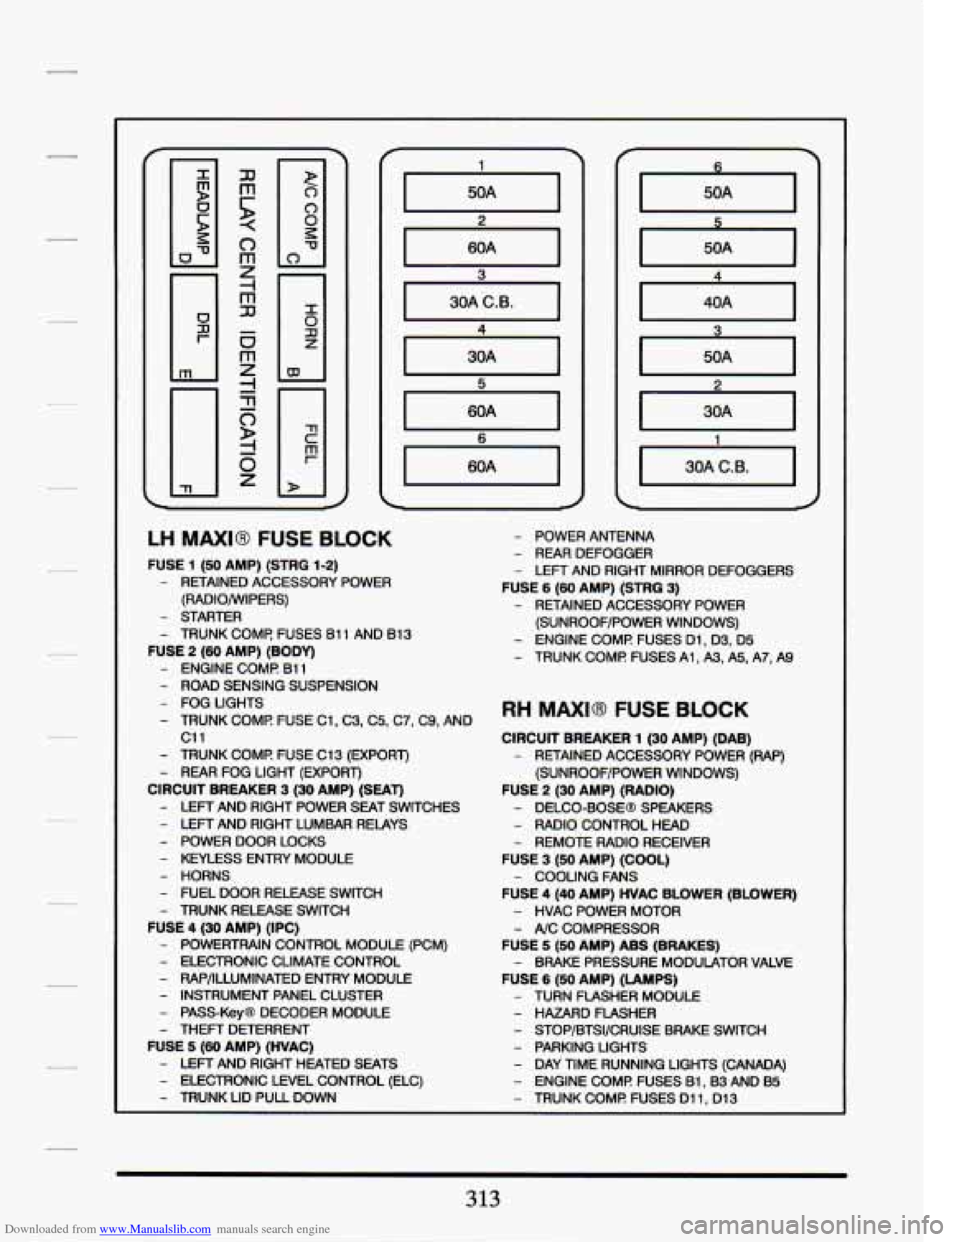 CADILLAC SEVILLE 1994 4.G Owners Manual Downloaded from www.Manualslib.com manuals search engine 60A I 
LH MAXI8 FUSE BLOCK 
FUSE  1 (50 AMP) (STRG 1-2) 
- RETAINED  ACCESSORY  POWER 
(RADIO/WIPERS) 
- STARTER 
- TRUNK  COMF!  FUSES 61 1  A